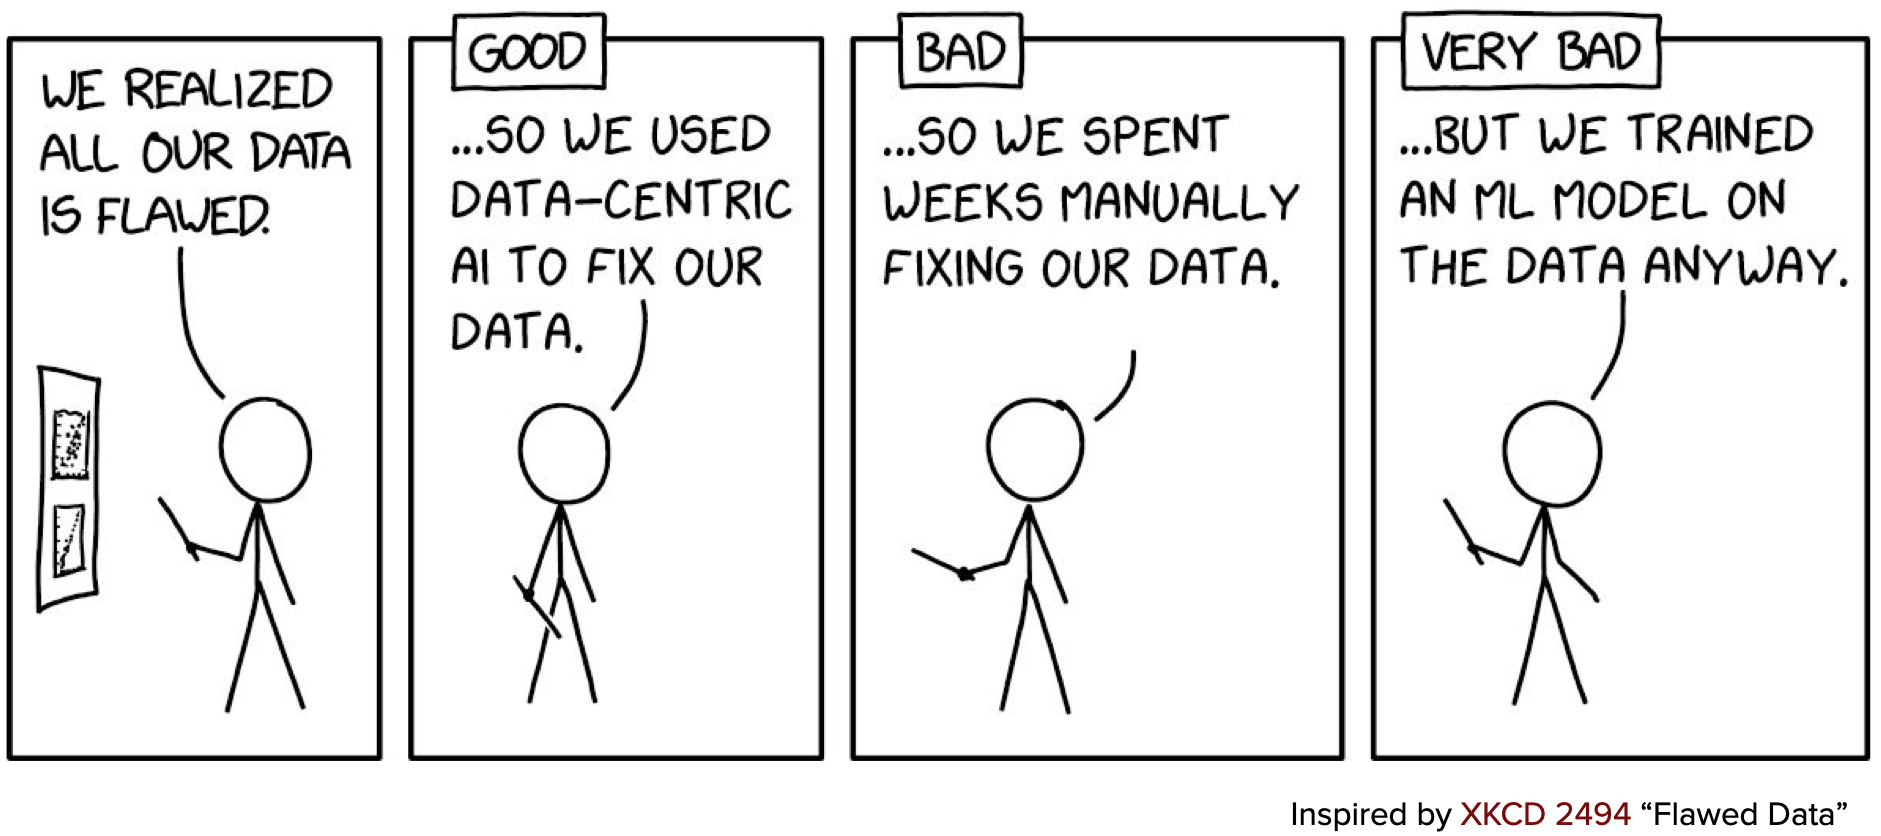 Comic showing the advantages of data-centric AI